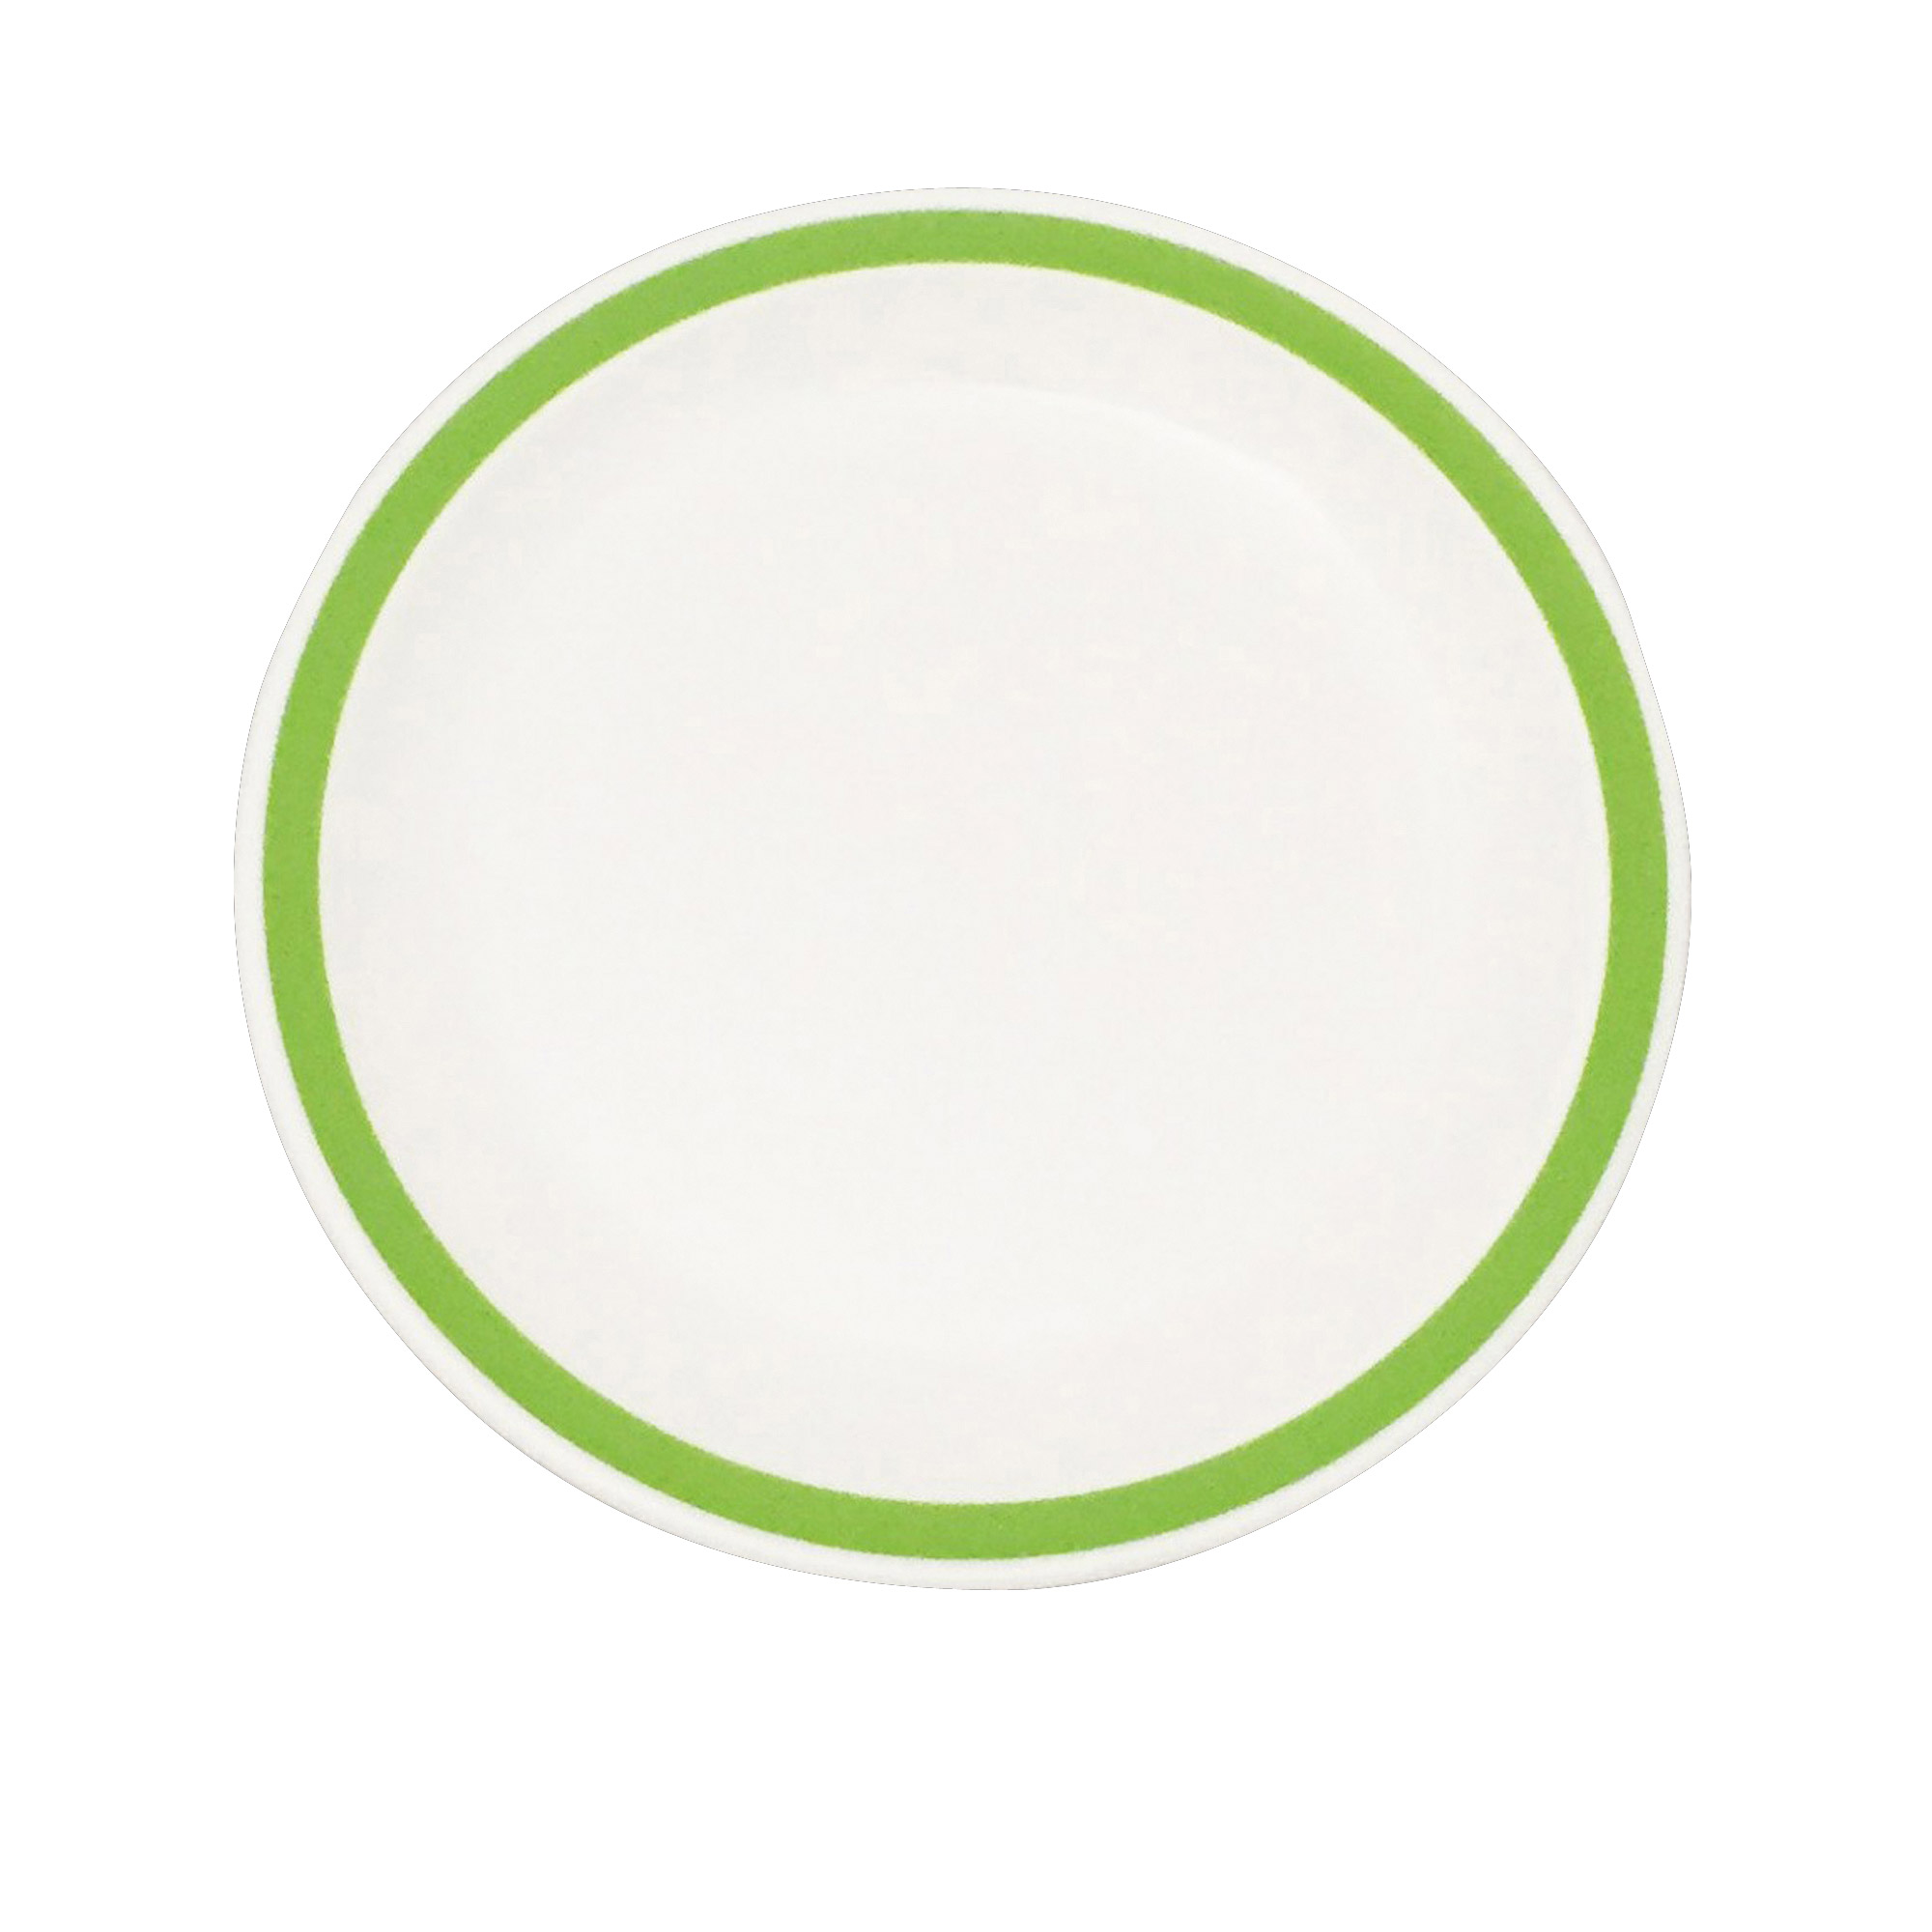 Polycarb White Side Plate 17cm with Green Narrow Rim - EACH